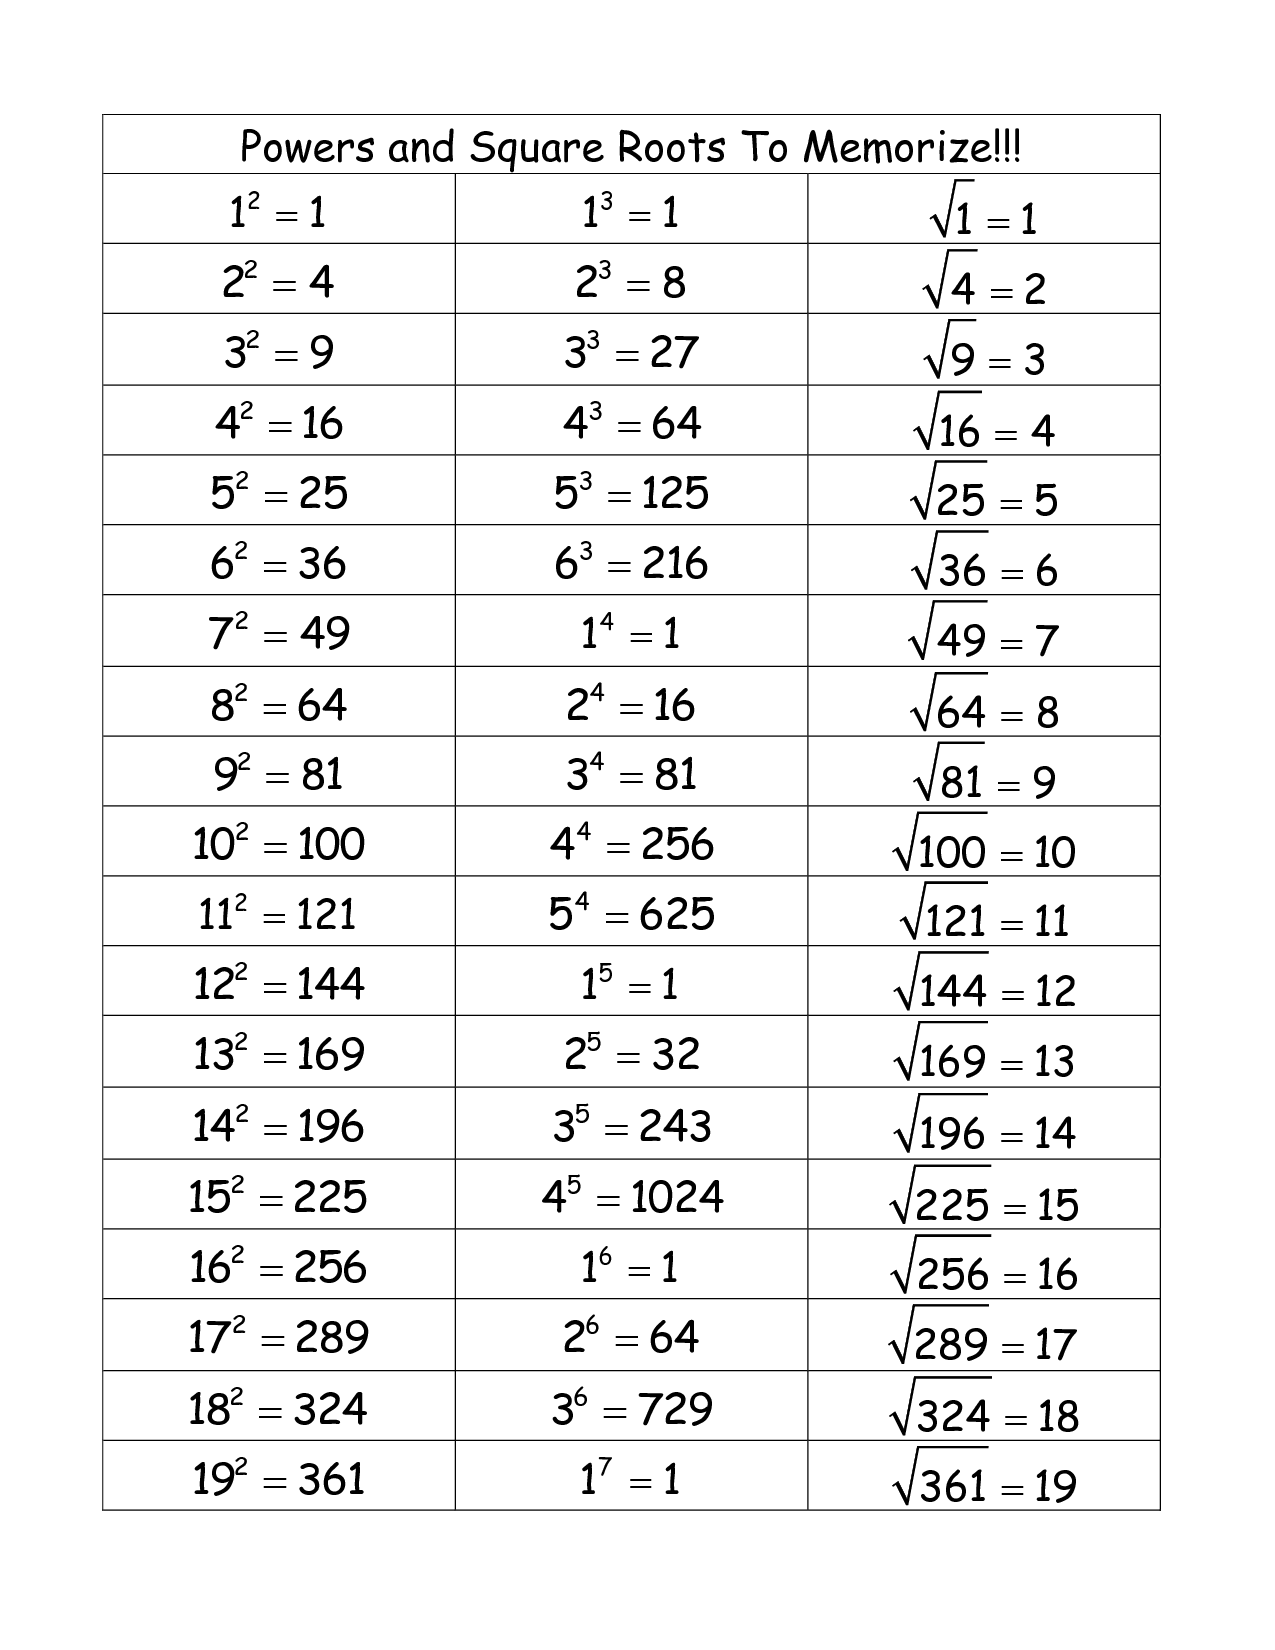 square-root-table-1-20-worksheets-worksheetscity